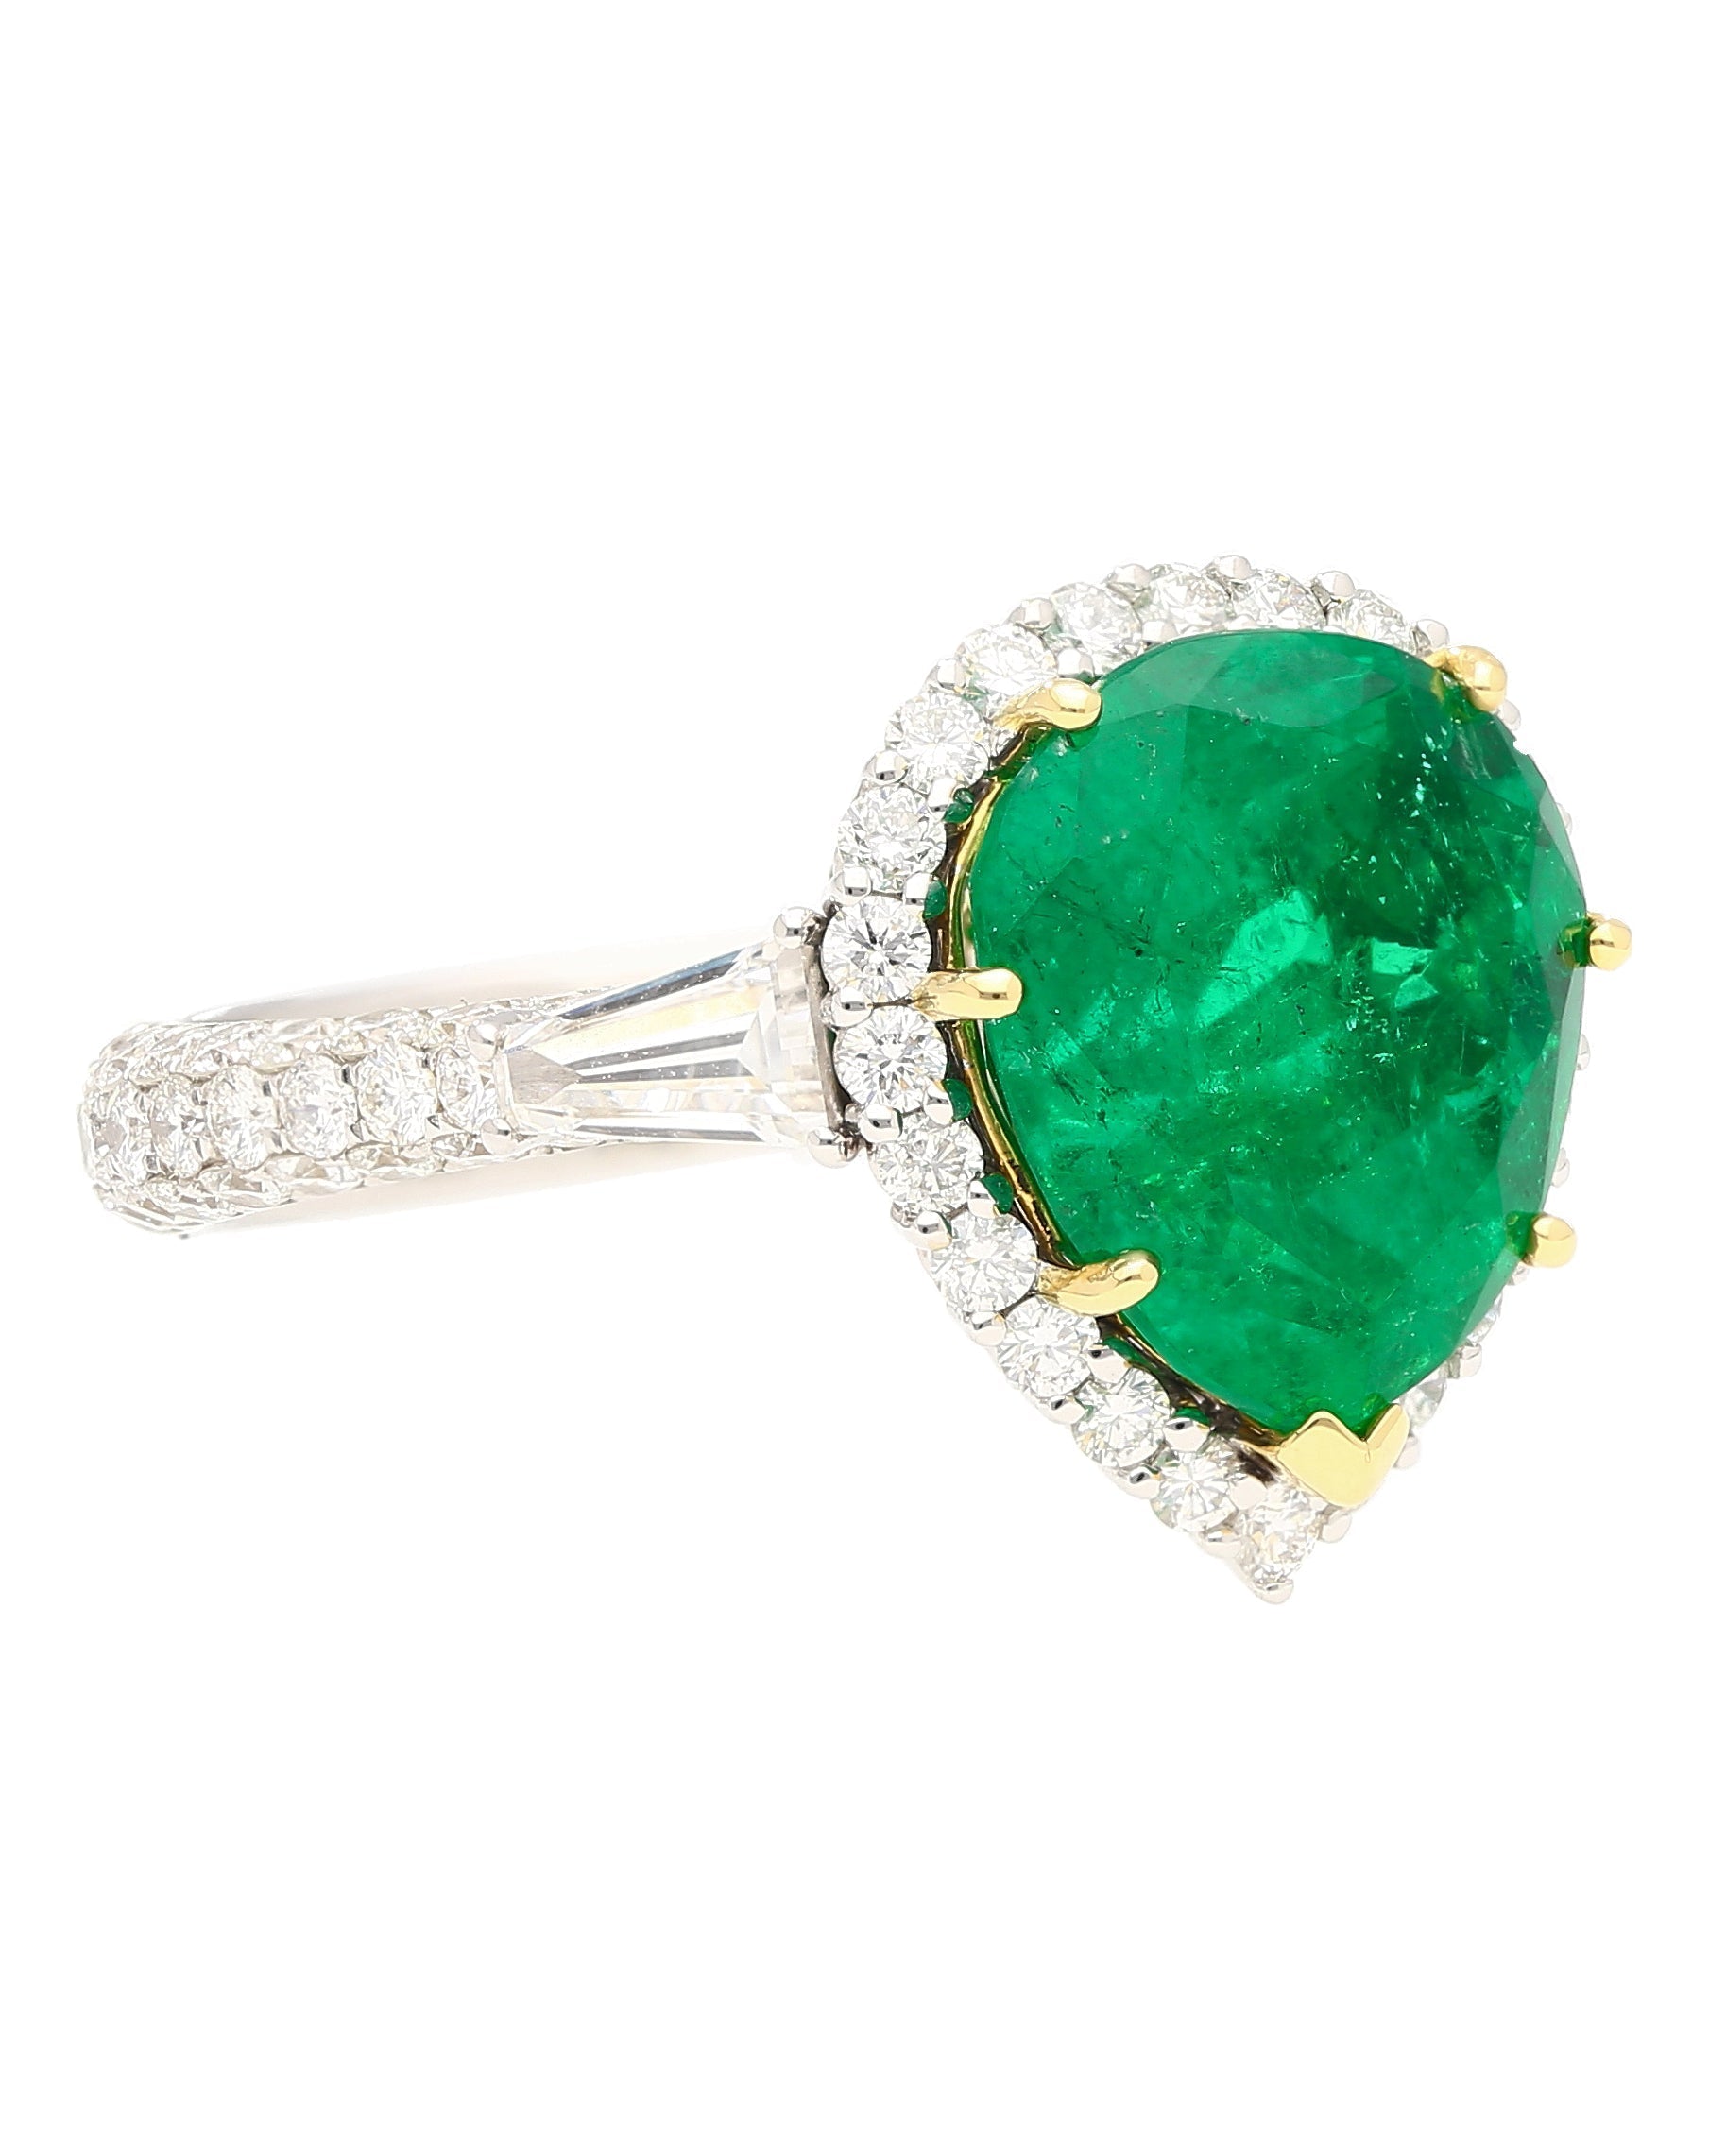 5_12-Carat-Pear-Cut-Colombian-Emerald-Ring-with-Baguette-Diamond-Sides-in-18K-Gold-Rings-2.jpg